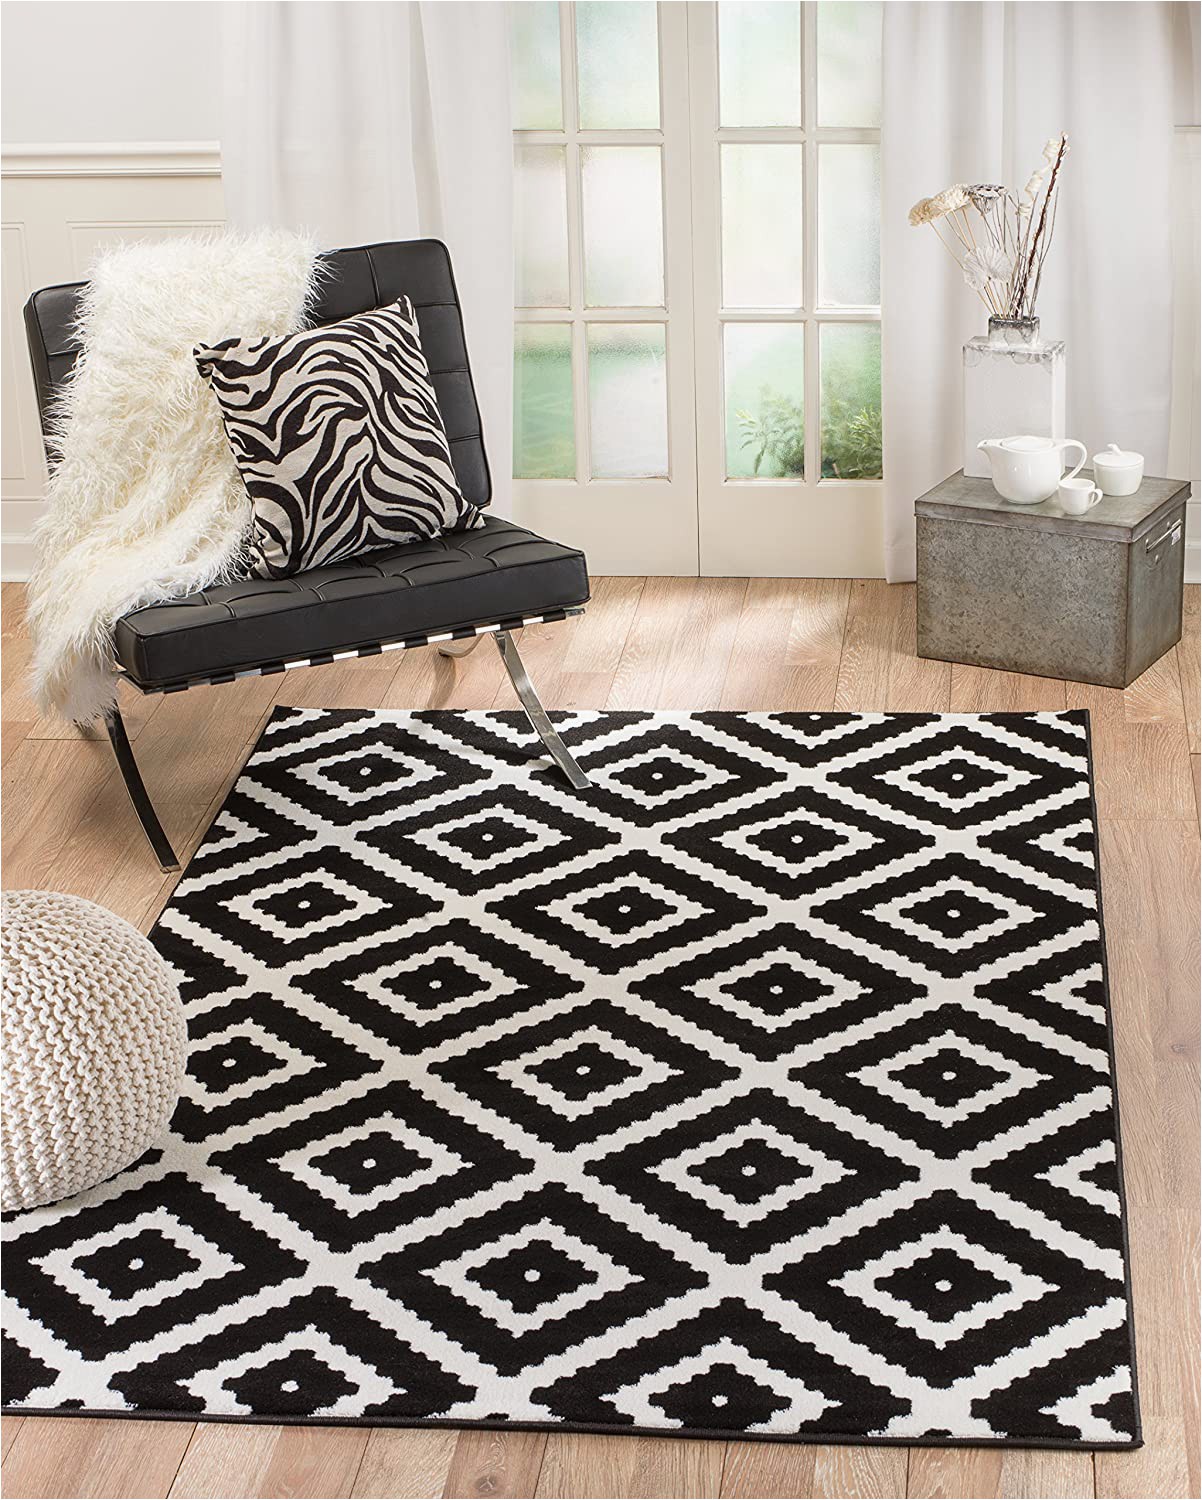 Grey Black and White area Rug Summit 46 Black White Diamond area Rug Modern Abstract Many Sizes Available 3 6" X 5 3 6" X 5